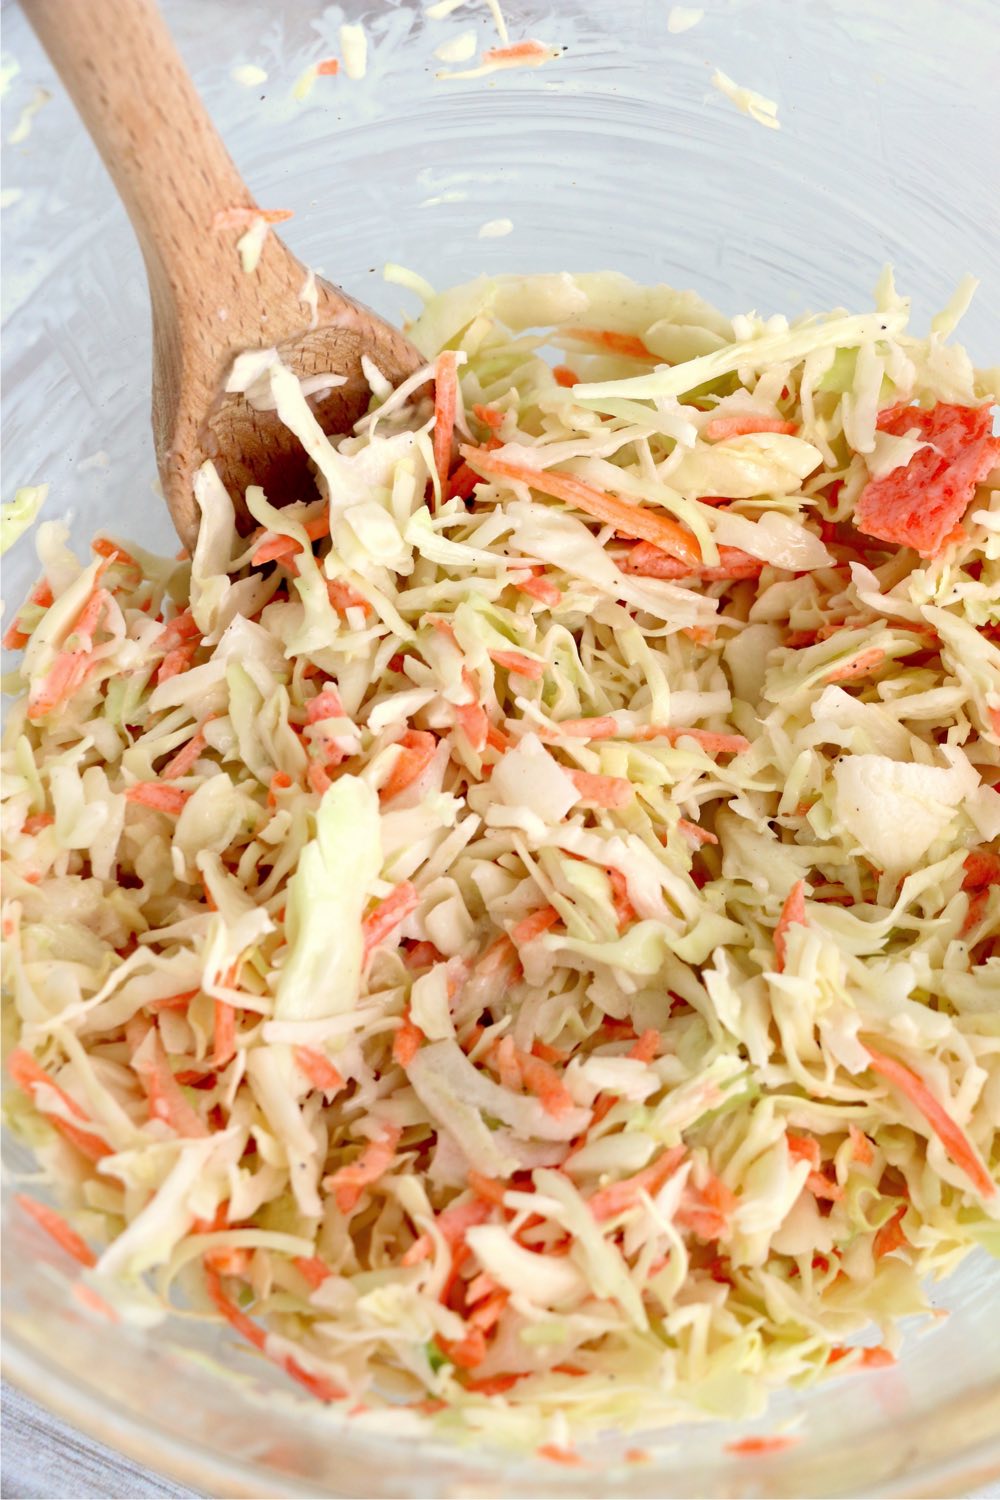 Mixing dressing with bag of coleslaw mix